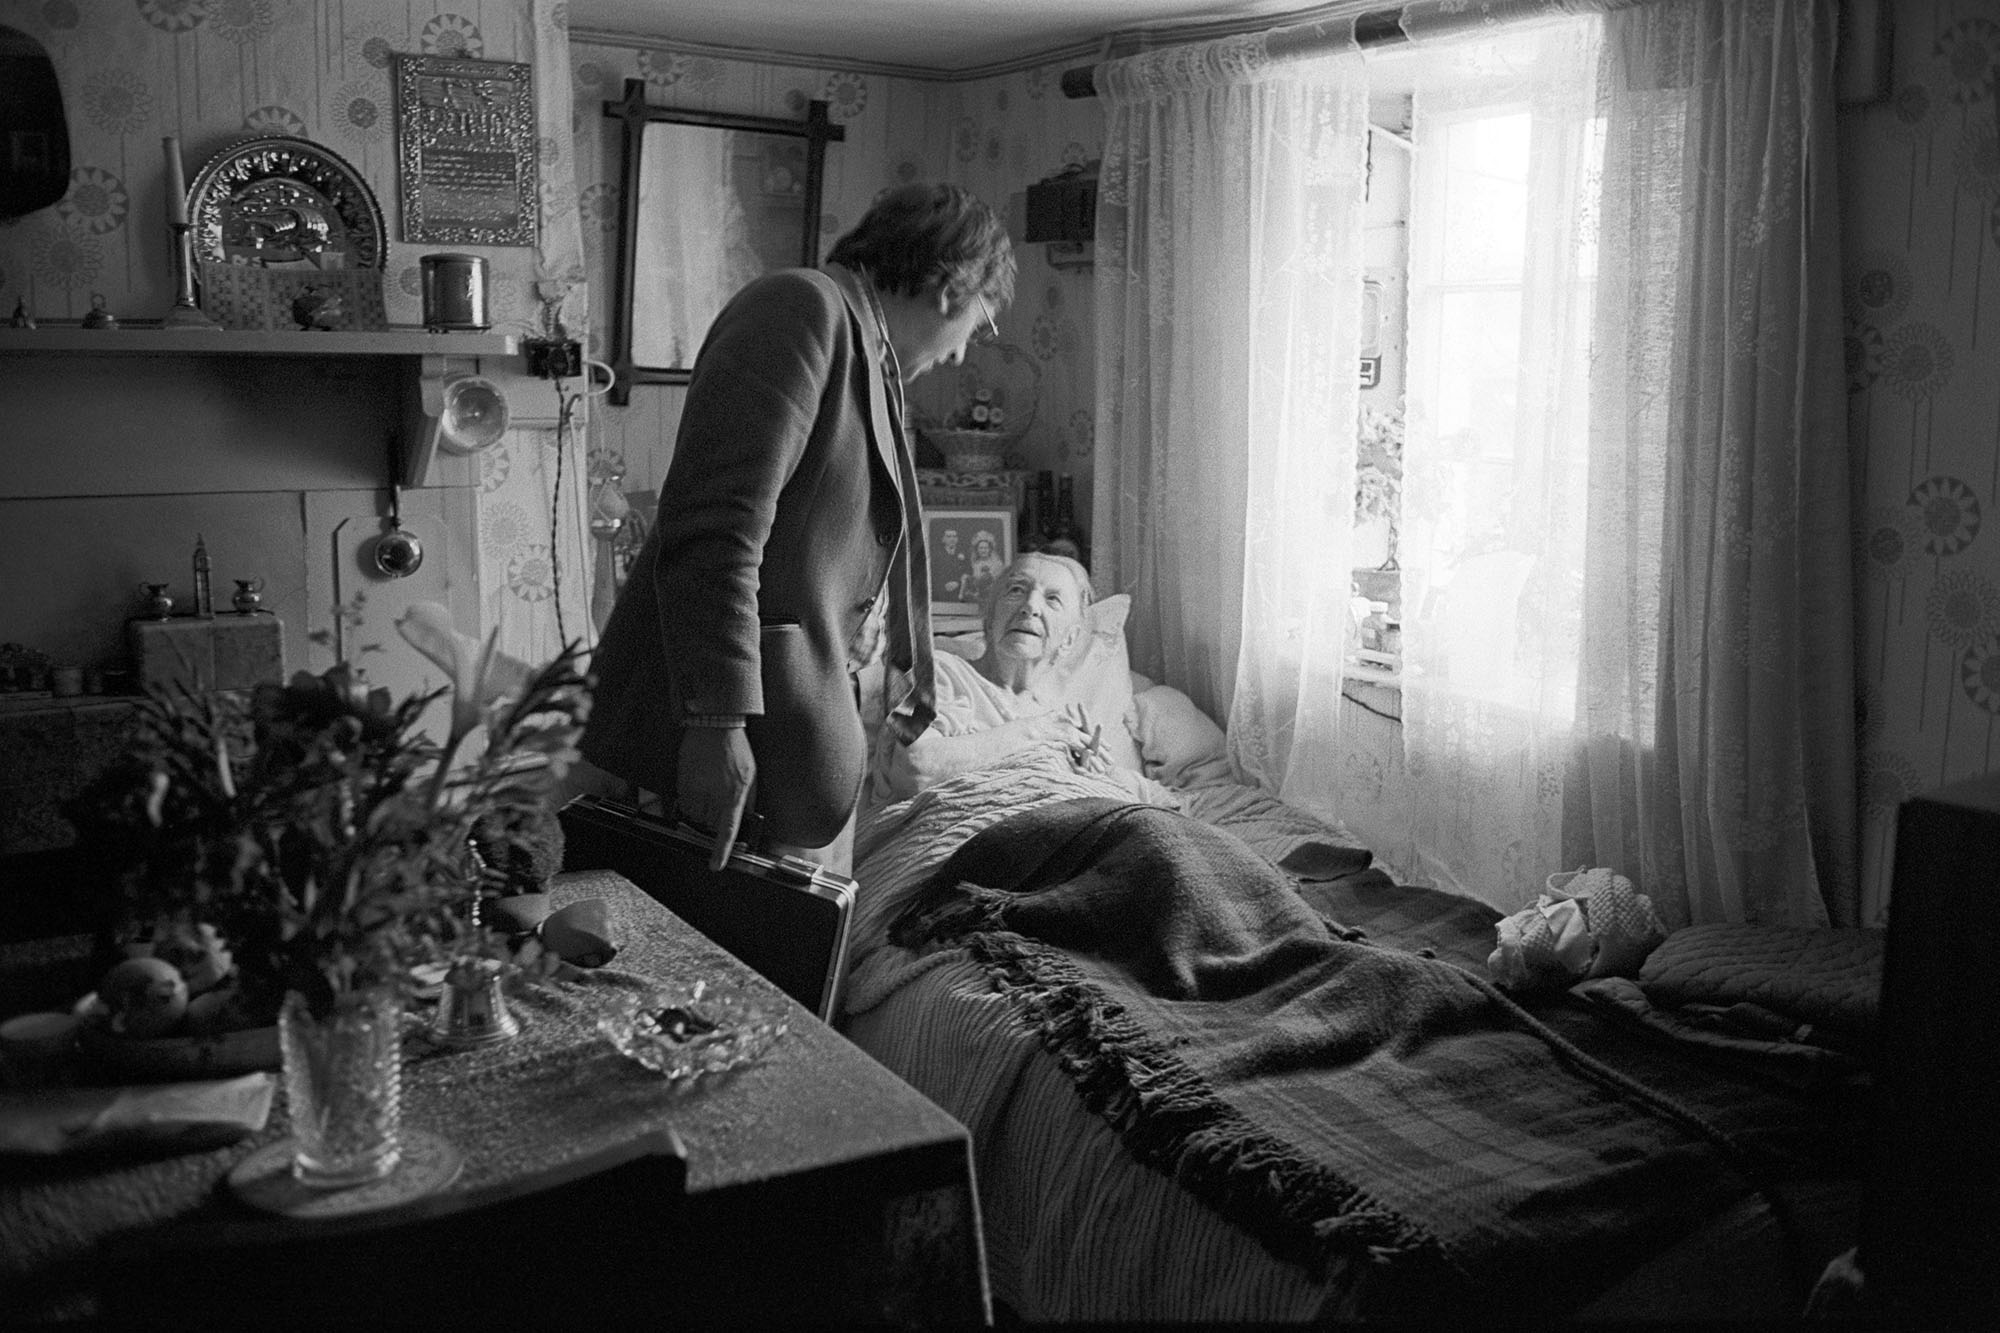 Doctor visiting elderly woman in bed, chatting. <br /> [Dr Paul Bangay talking to a woman in bed at her home in Langtree. Pictures and photographs are visible, as well as a vase of flowers on a table by her bed and ornaments on her mantelpiece.]